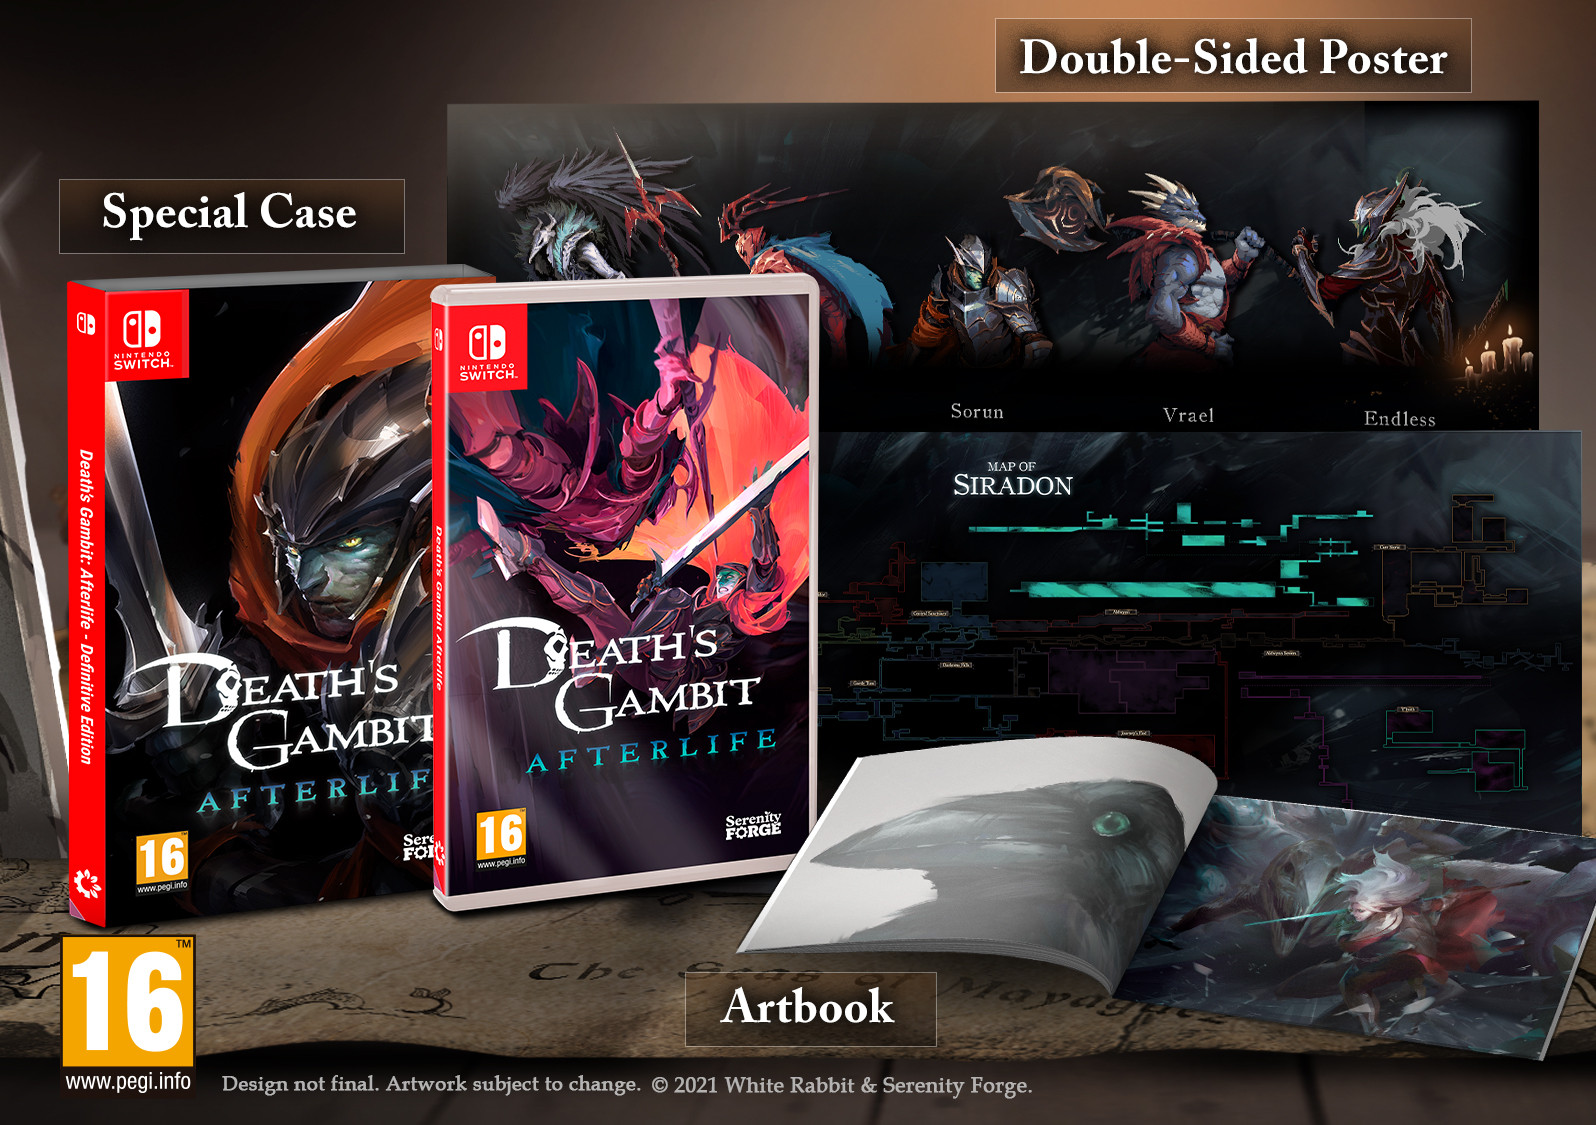 Death's Gambit Afterlife - Nintendo Switch